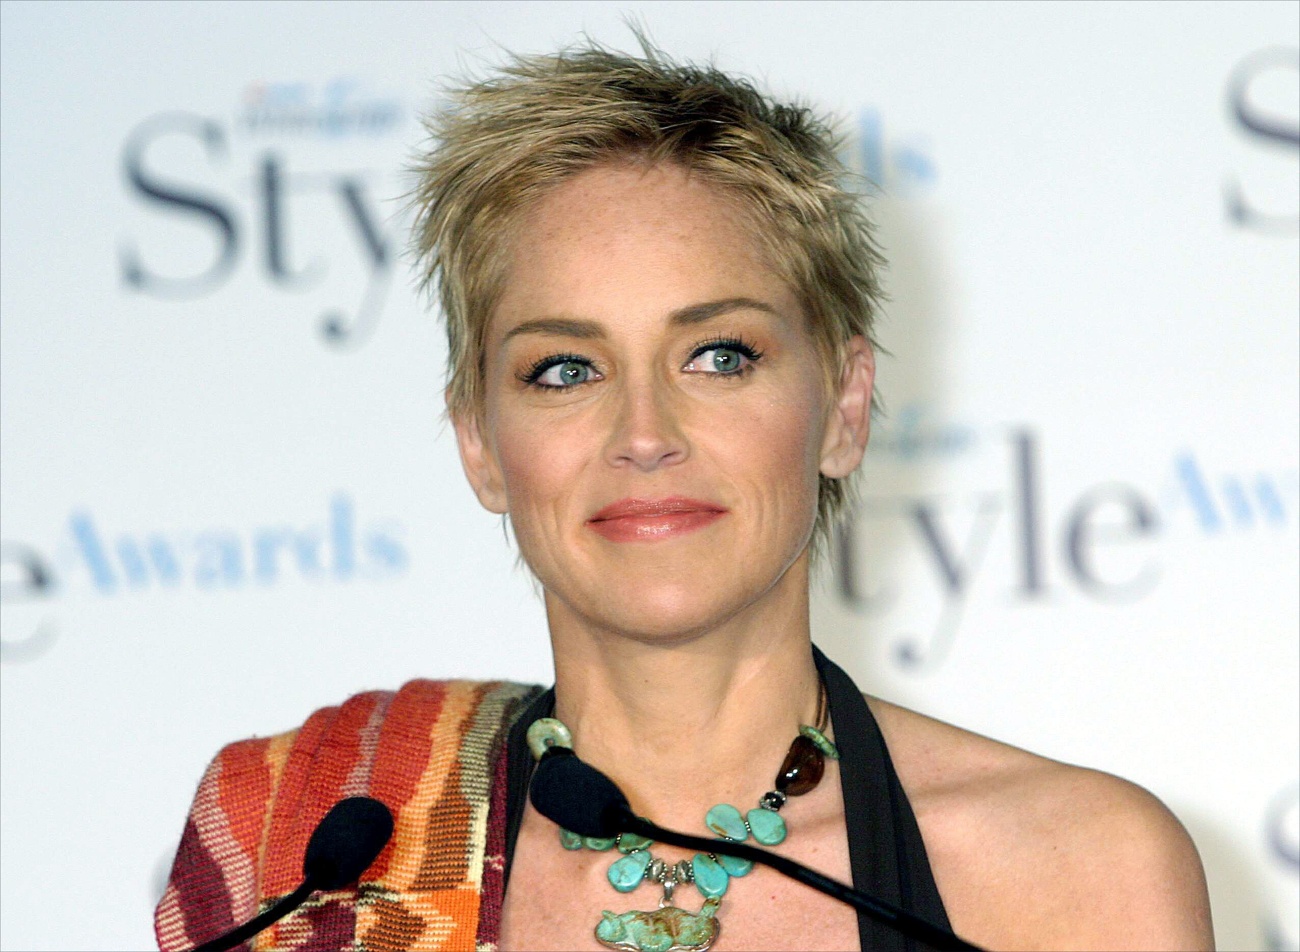 Sharon Stone confesses: Playing Catherine in »Basic Instinct» made her lose custody of her child